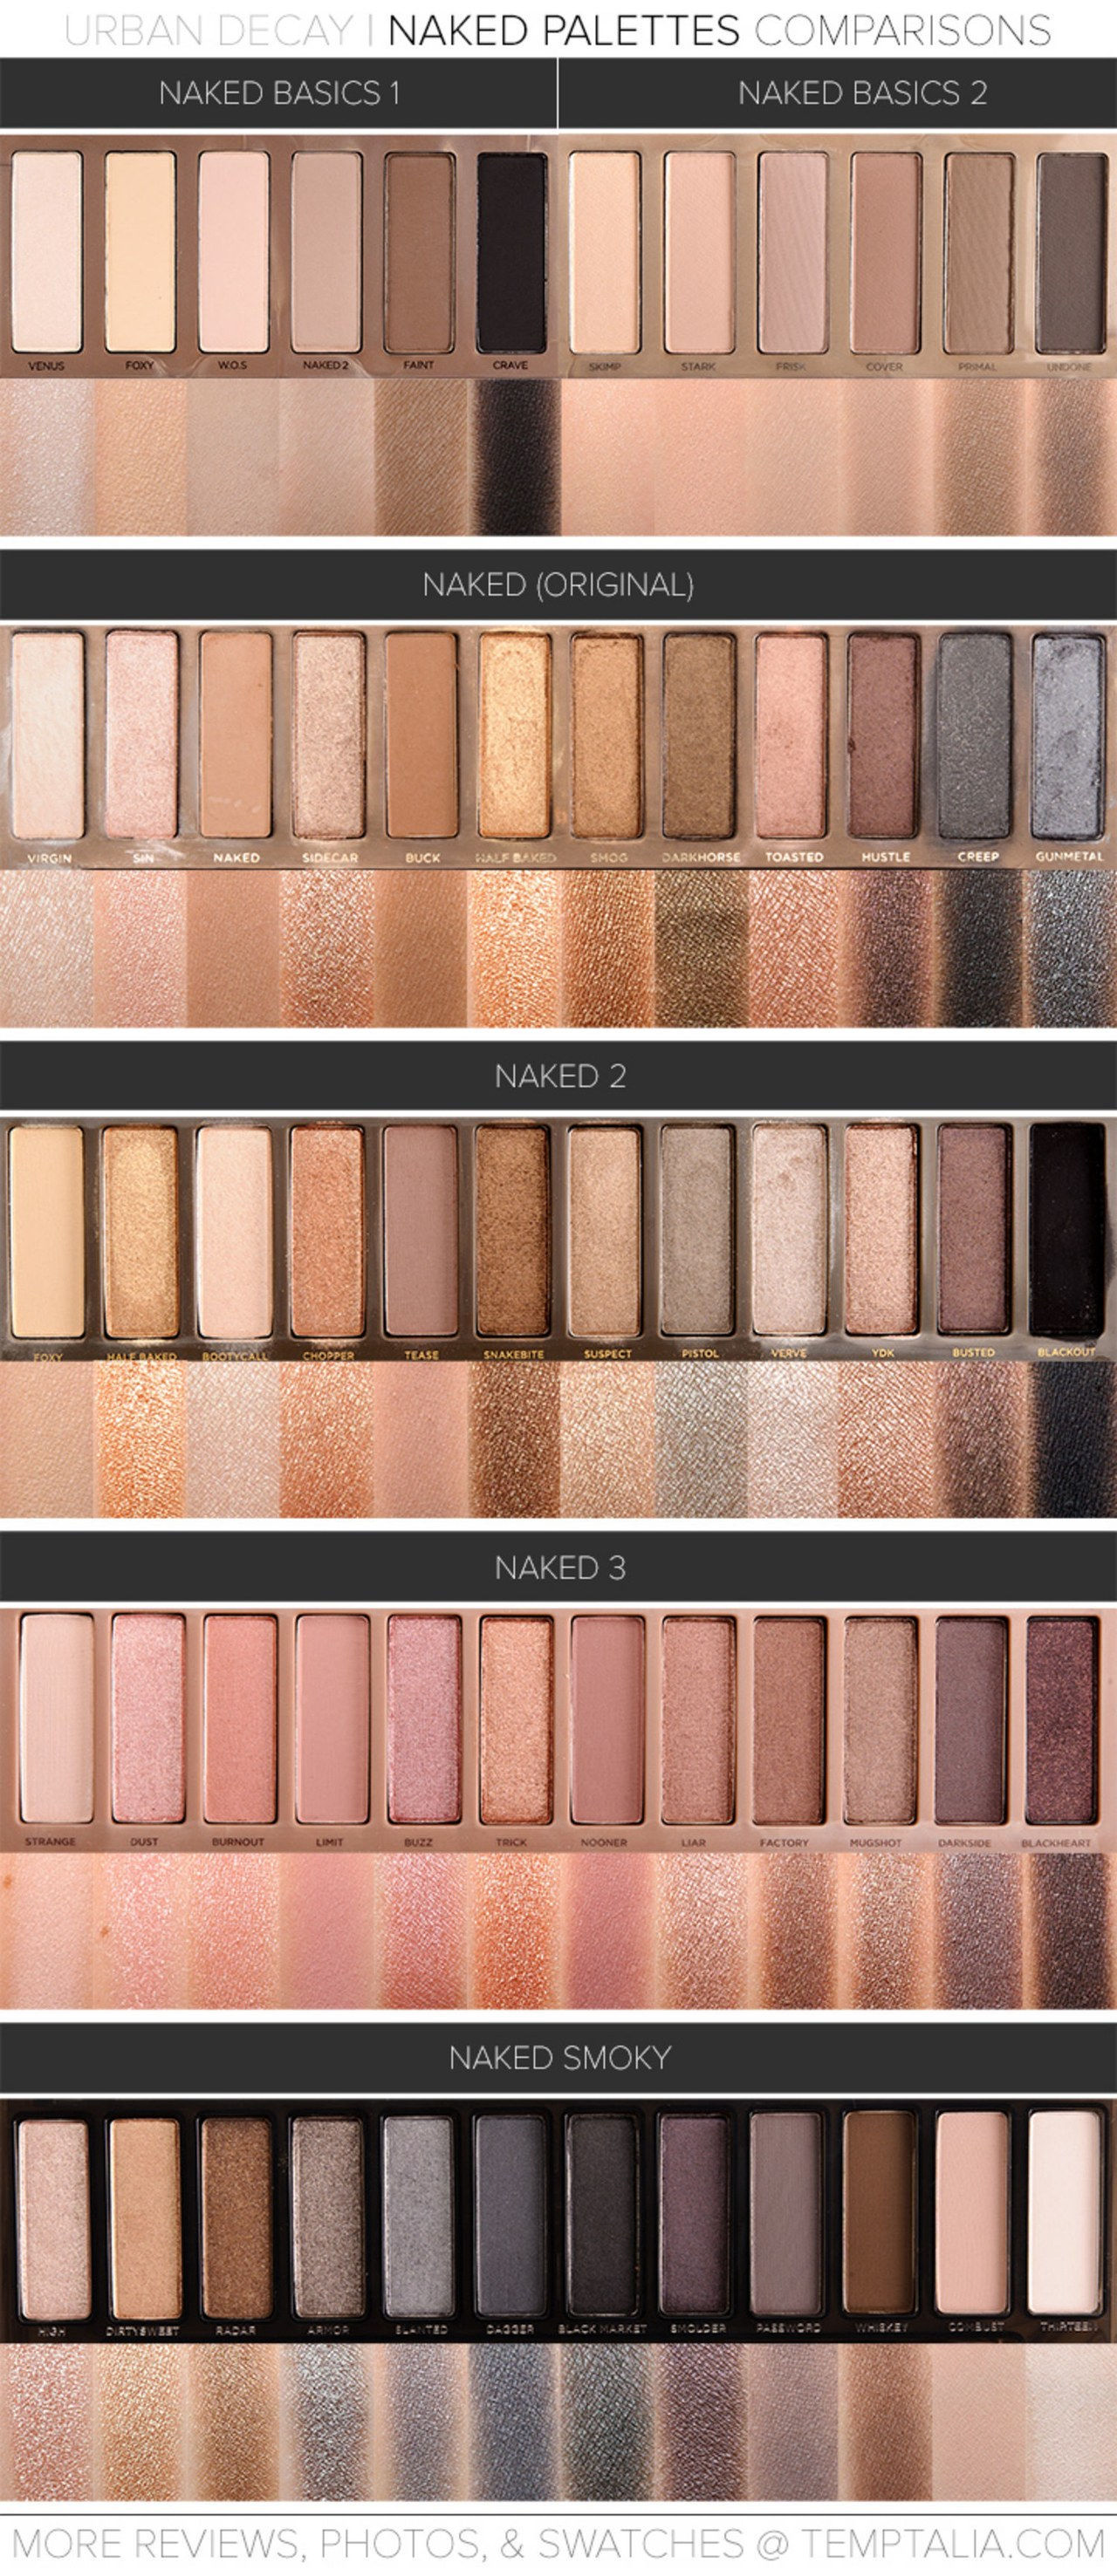 städtisch decay naked smoky swatches comparisons